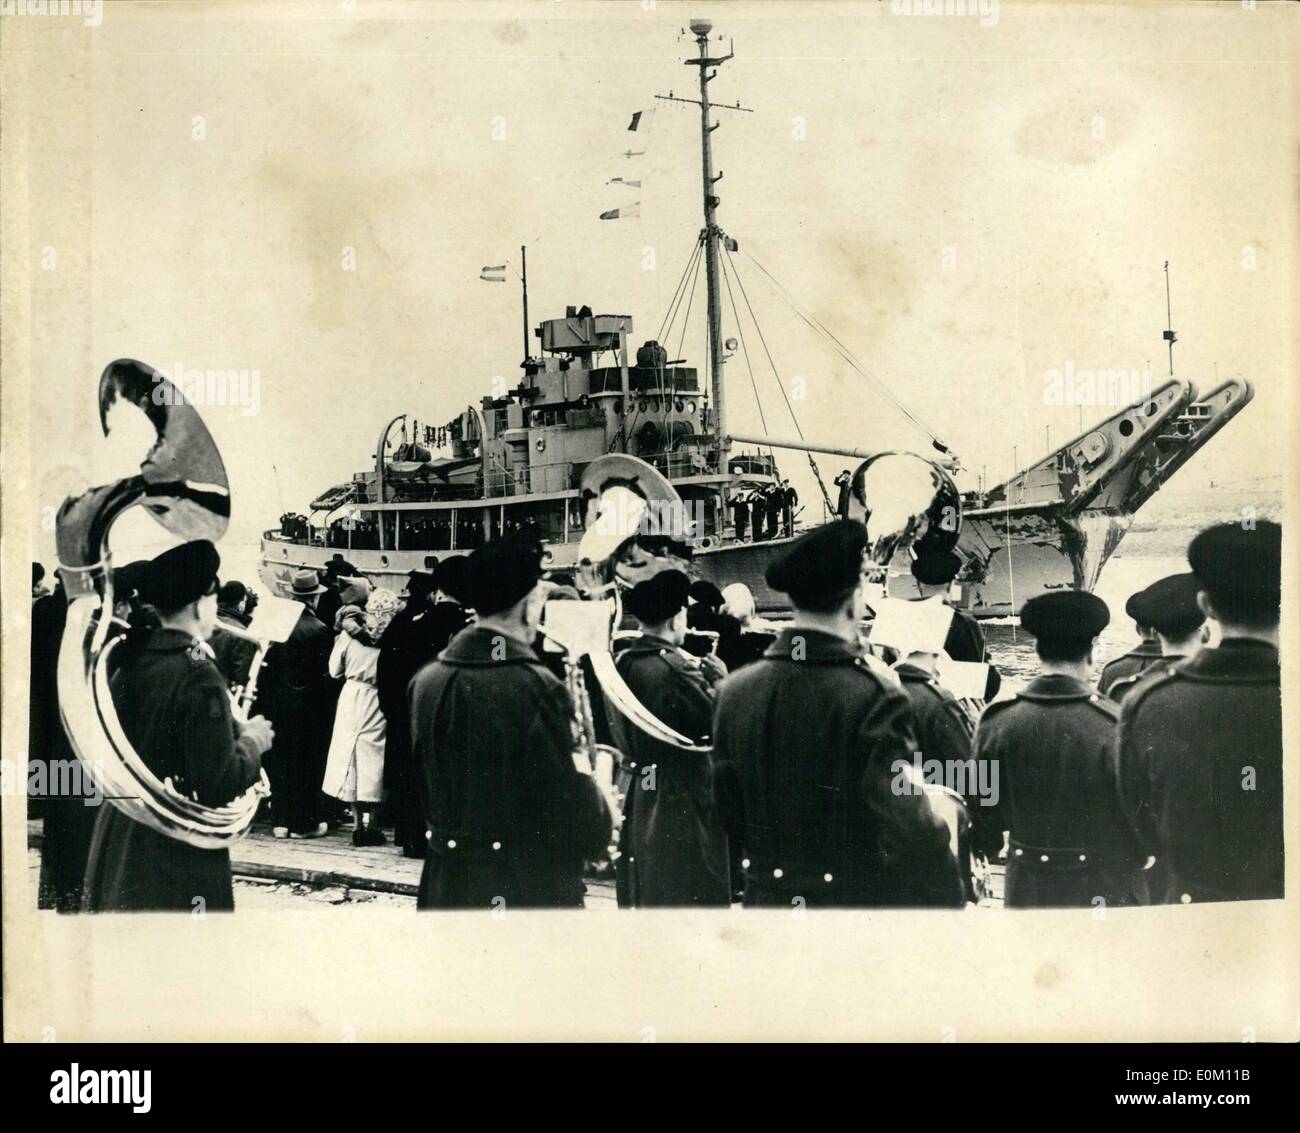 Jan. 01, 1953 - The ''Gerberus'' arrives in the Netherlands.. New Vessel For N.A.T.O. forces. Photo shows: The scene at the harbour of Don Holder, Netherlands during the ceremony to greet the vessel ''Gerberus'' the first vessel to arrive from the United States for the North Atlantic Treaty Organization. Stock Photo